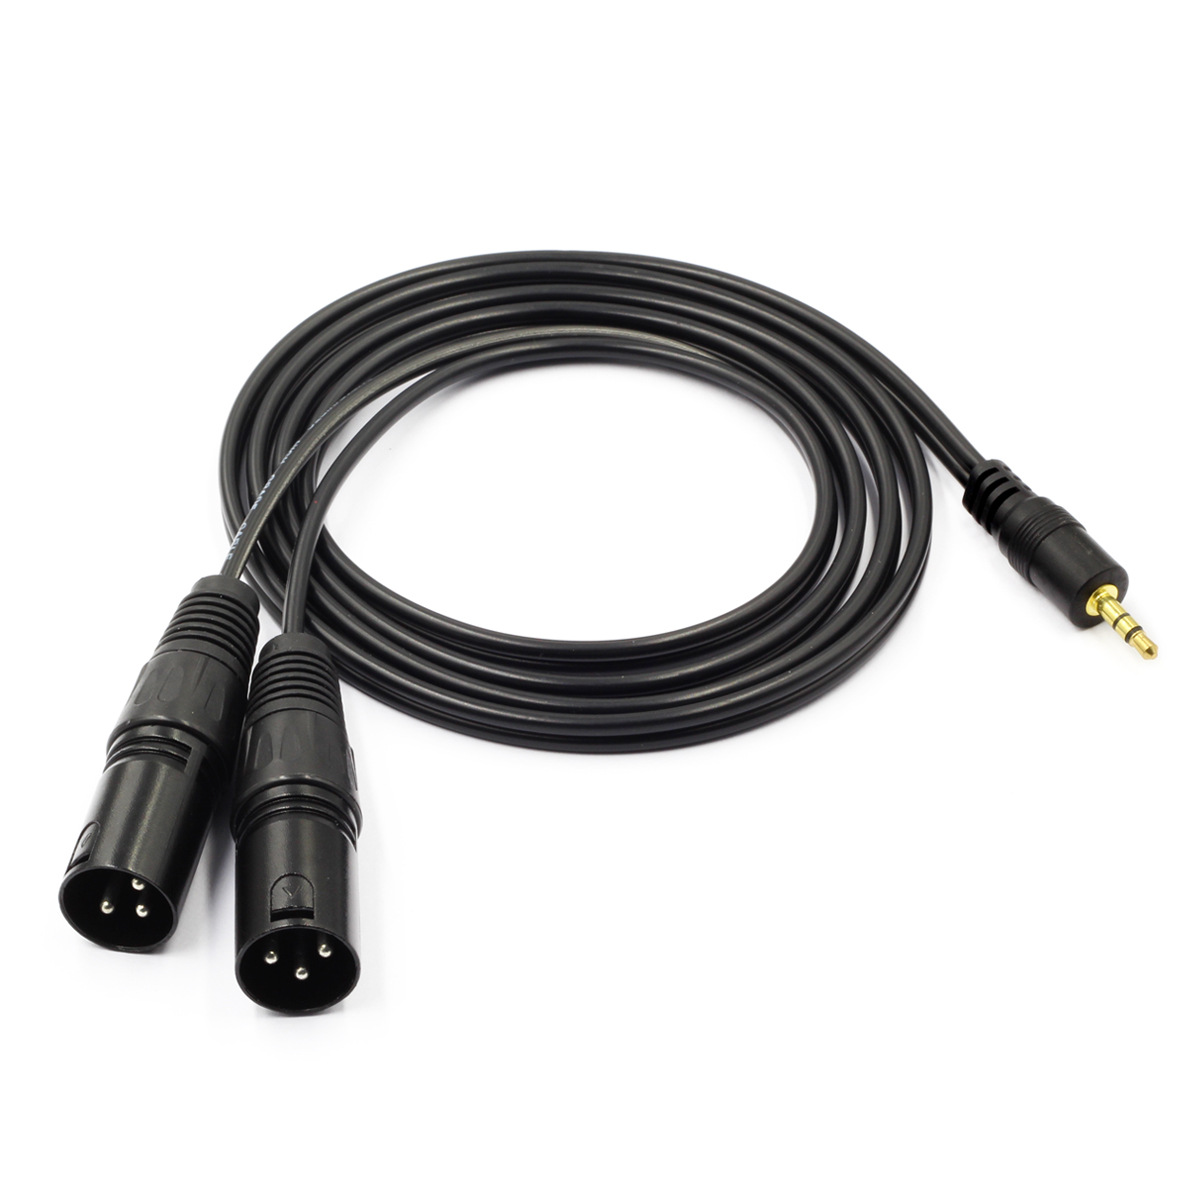 3.5mm male to XLR Female audio cable